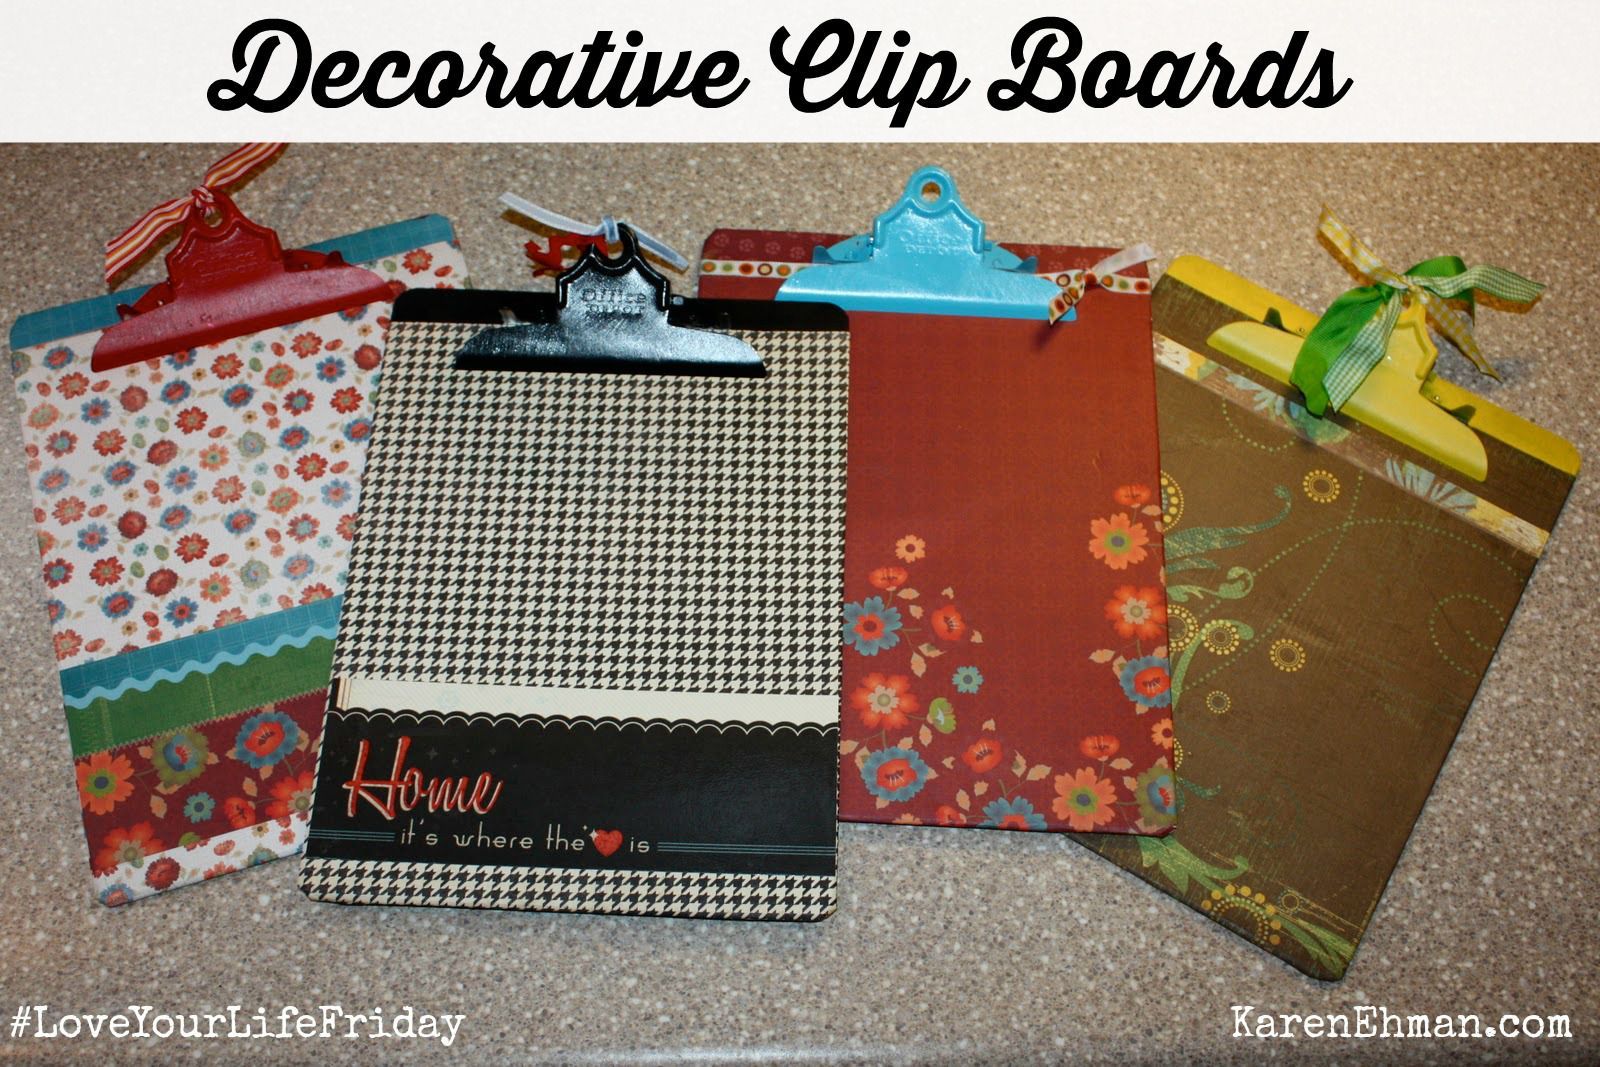 Cute & easy decorative clipboards from karenehman.com for #LoveYourLifeFriday